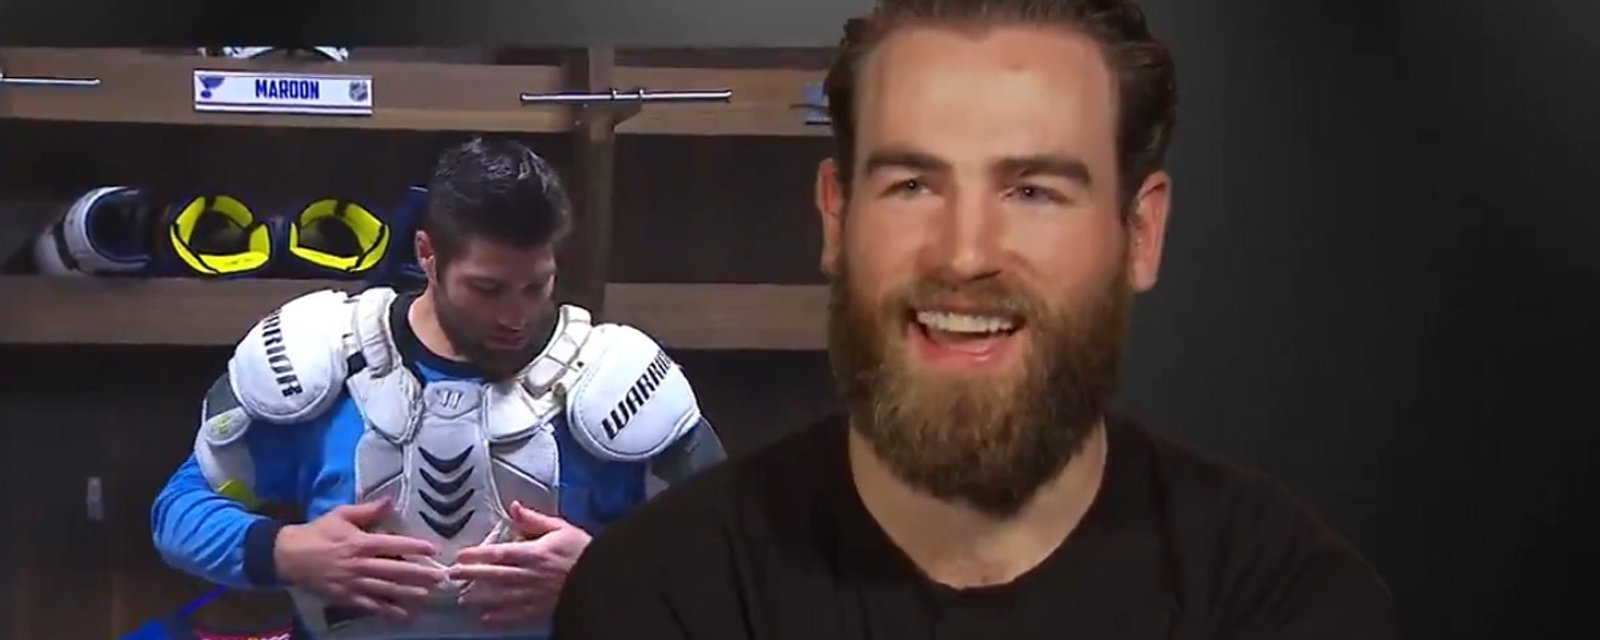 NHL players reveal who has the smelliest equipment!